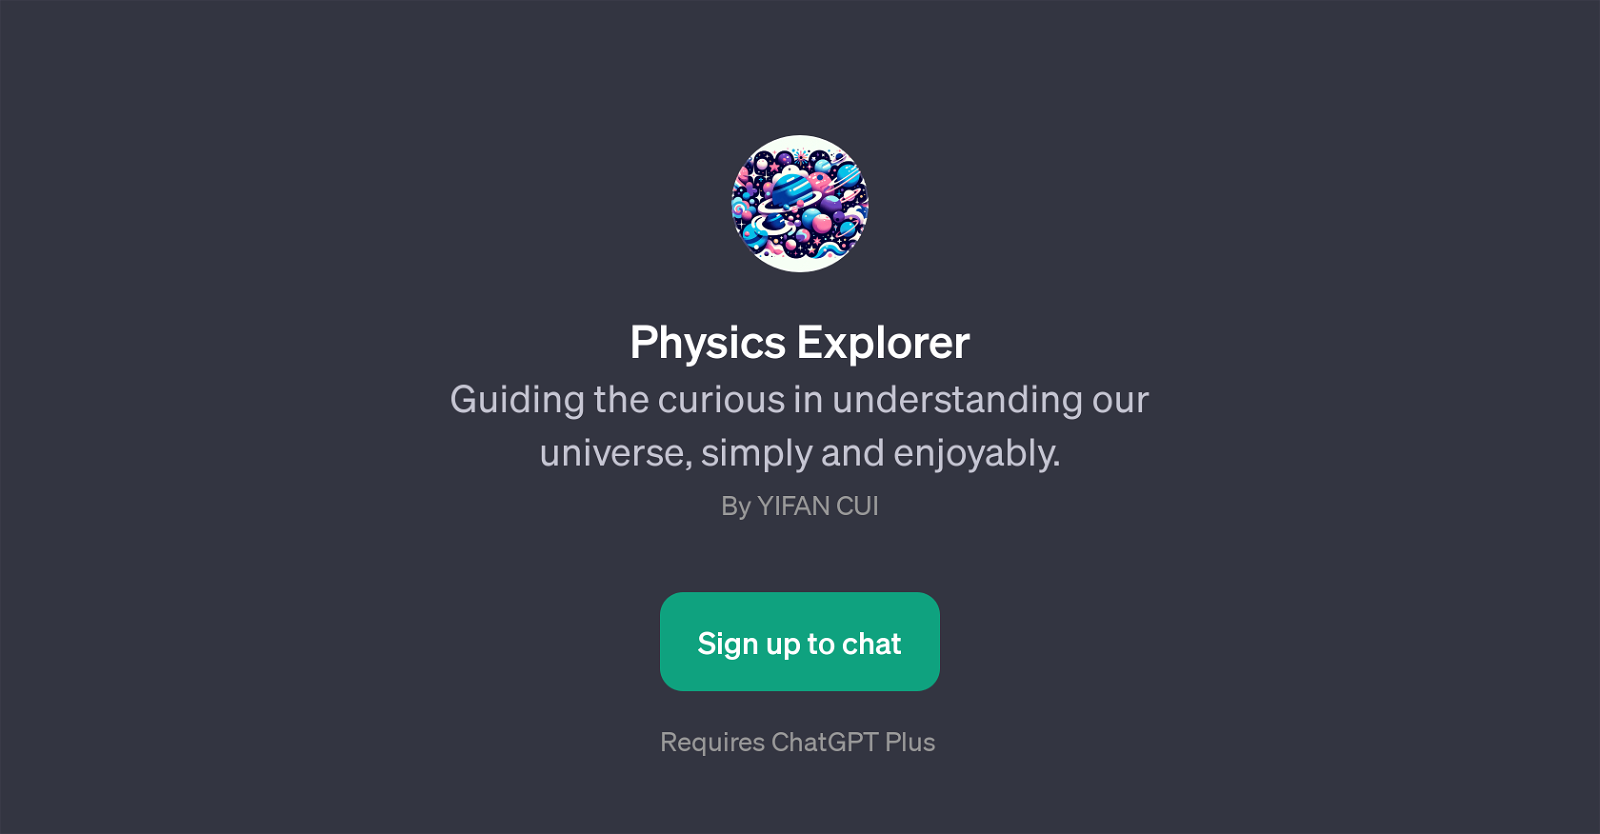 Physics Explorer And 11 Other AI Tools For Physics tutoring